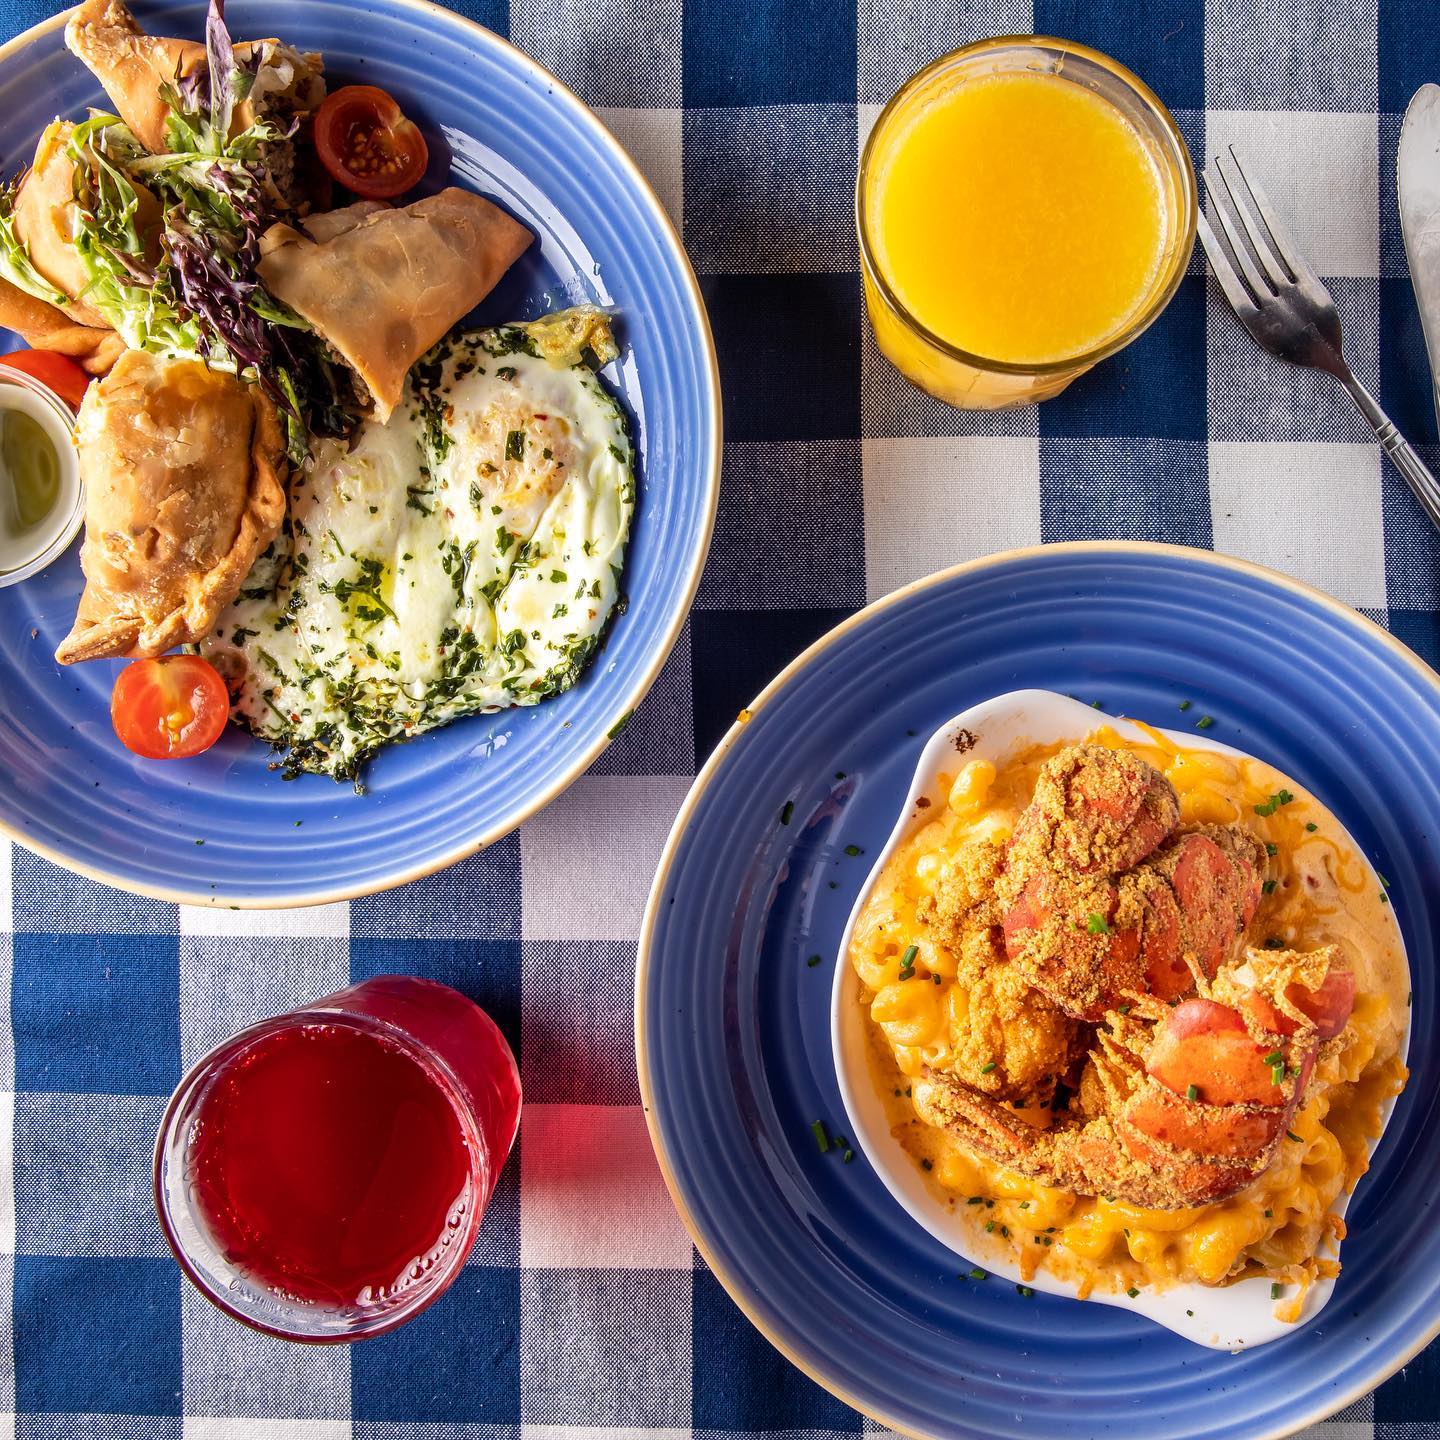 Two plates with brunch dishes on a checkered tablecloth, and two juice drinks on the side.